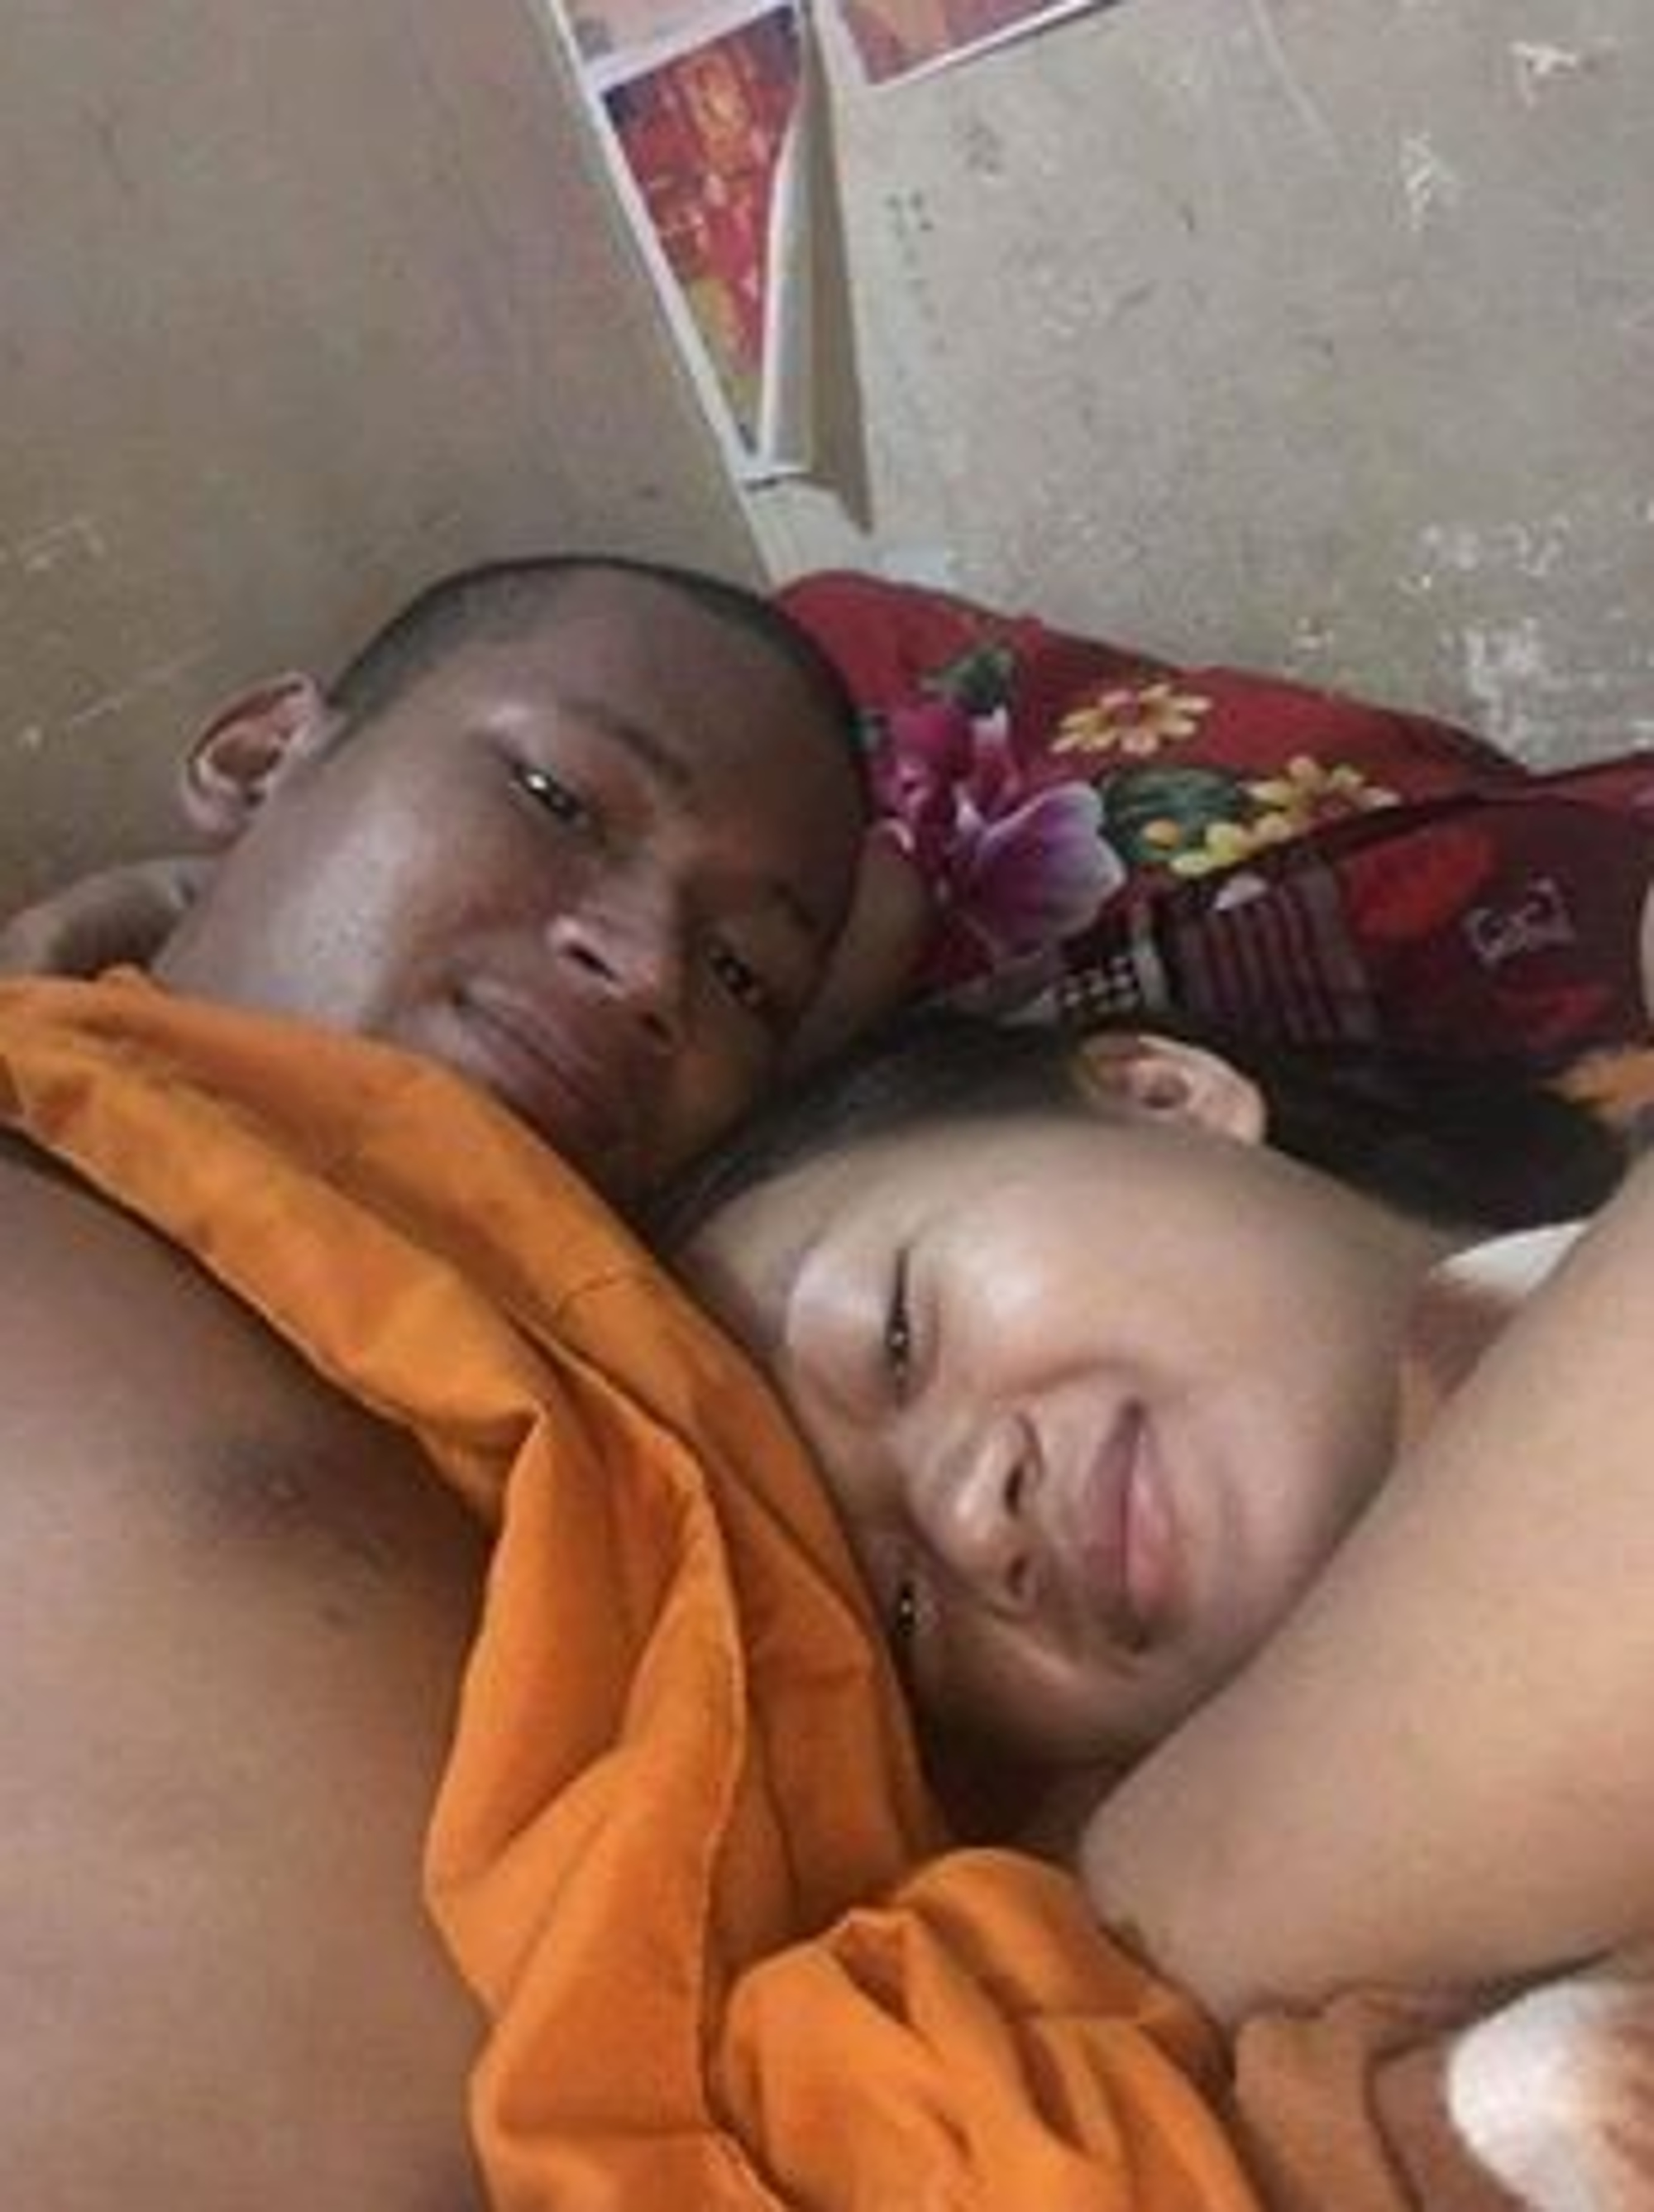 Read more about the article Pics Of Monk In Bed With Woman At Backpacker Spot Probed